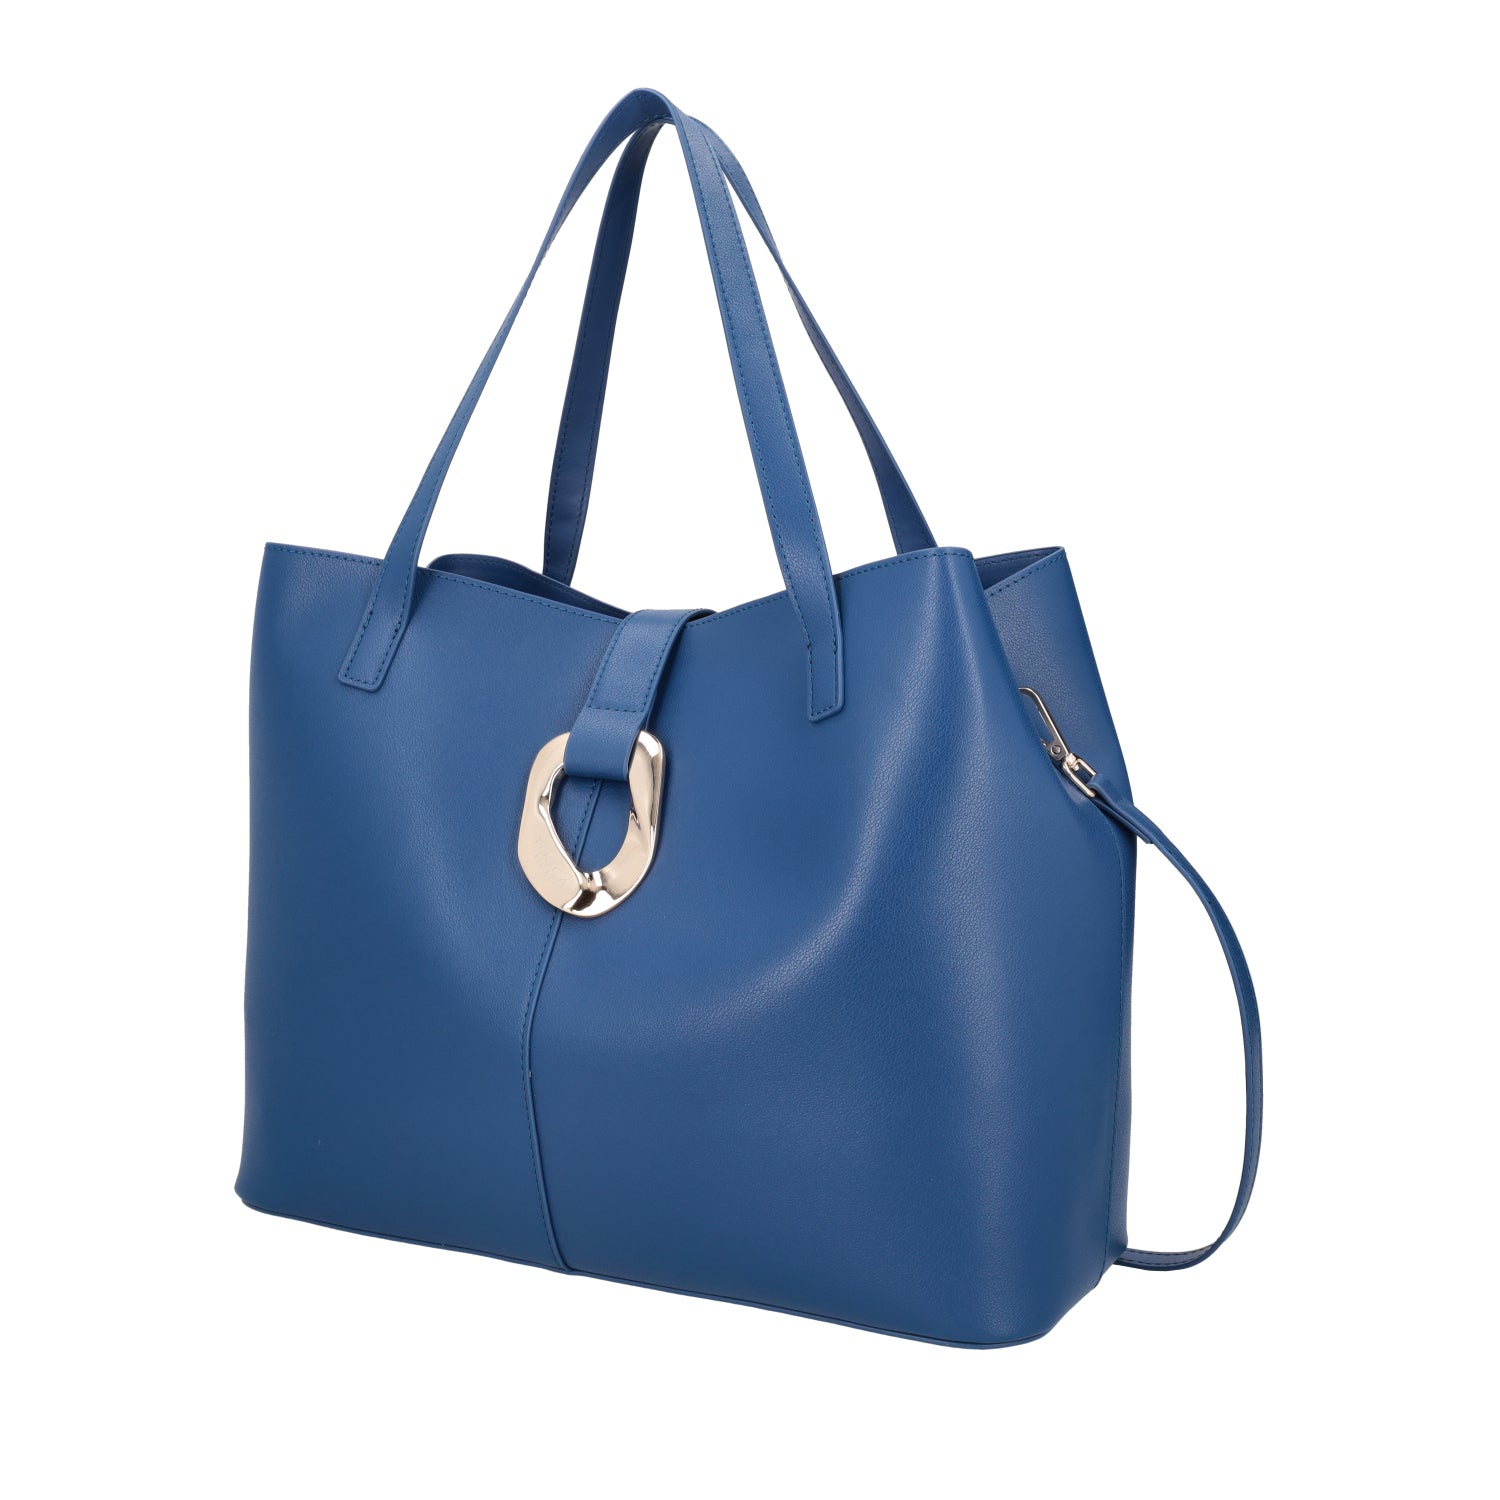 BLUE PRIMULA SHOPPING BAG WITH GOLDEN ACCESSORY